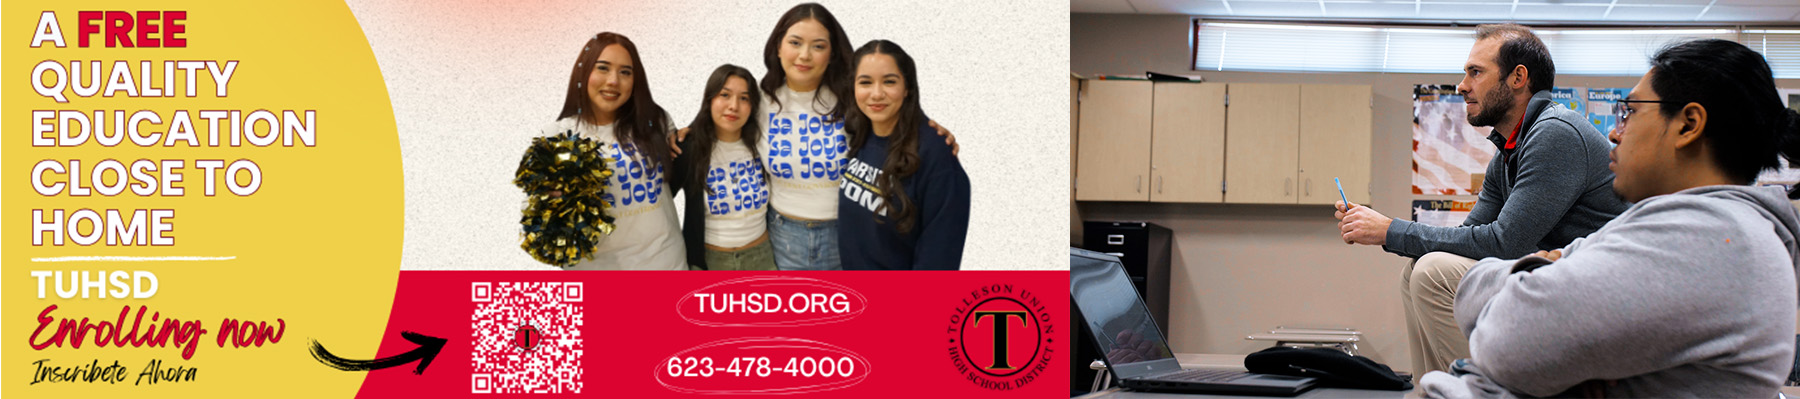 A free quality education close to home - TUHSD Enrolling now | Inscribete Ahora - tuhsd.org - 623-478-4000 | Two students sitting in classroom